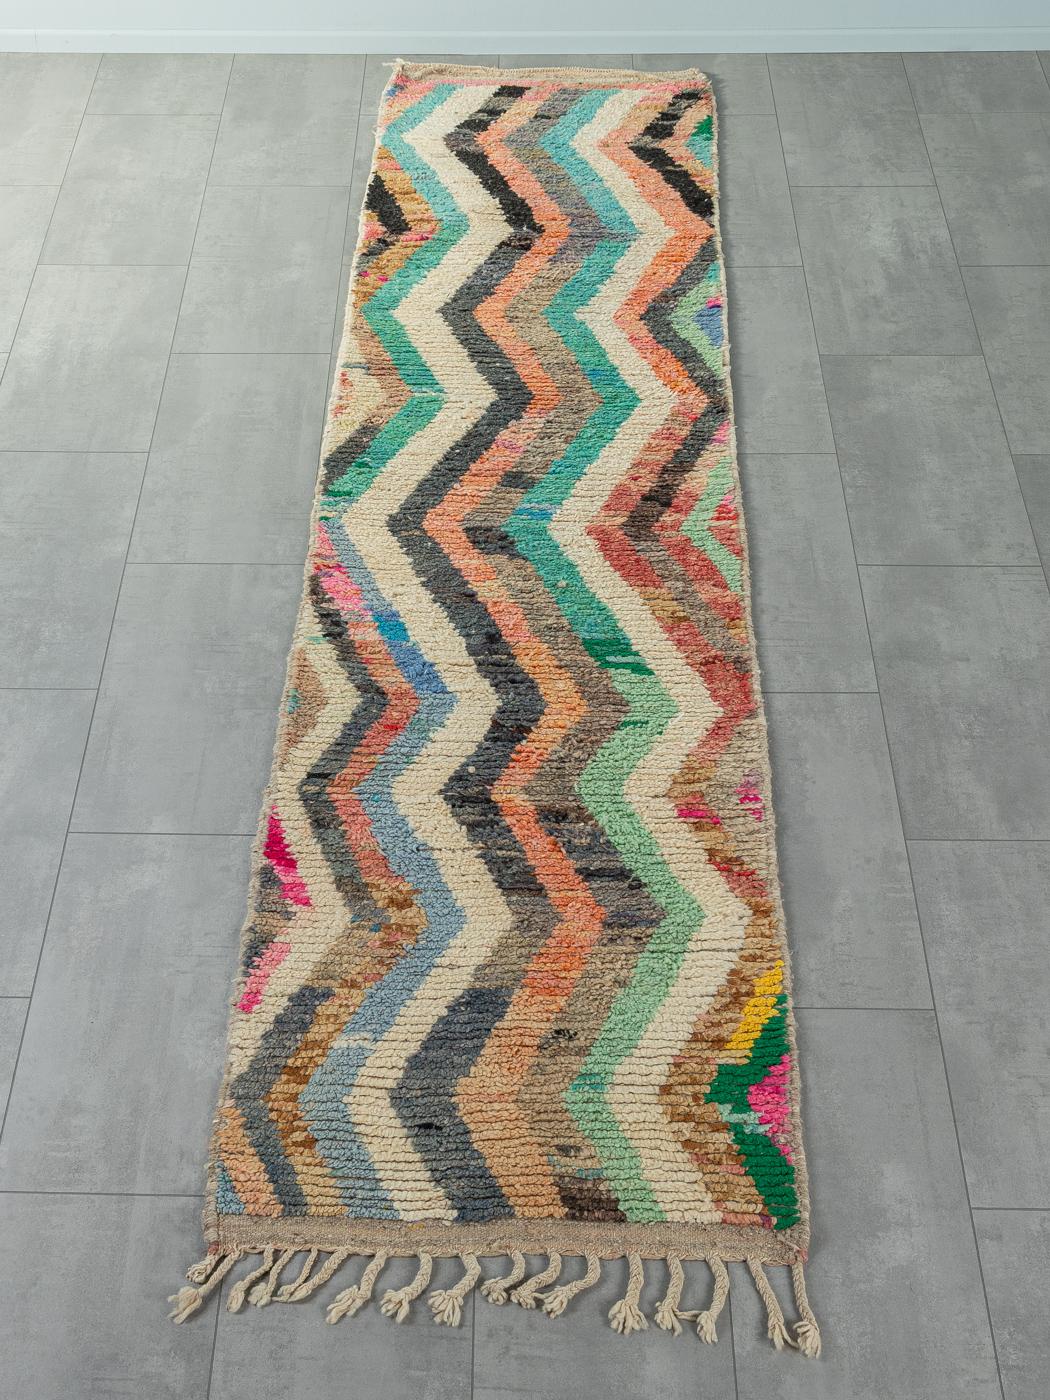 This Vintage runner is a 100% wool rug – soft and comfortable underfoot. Our Berber rugs are handmade, one knot at a time. Each of our Berber rugs is a long-lasting one-of-a-kind piece, created in a sustainable manner with local wool. 

Vintage